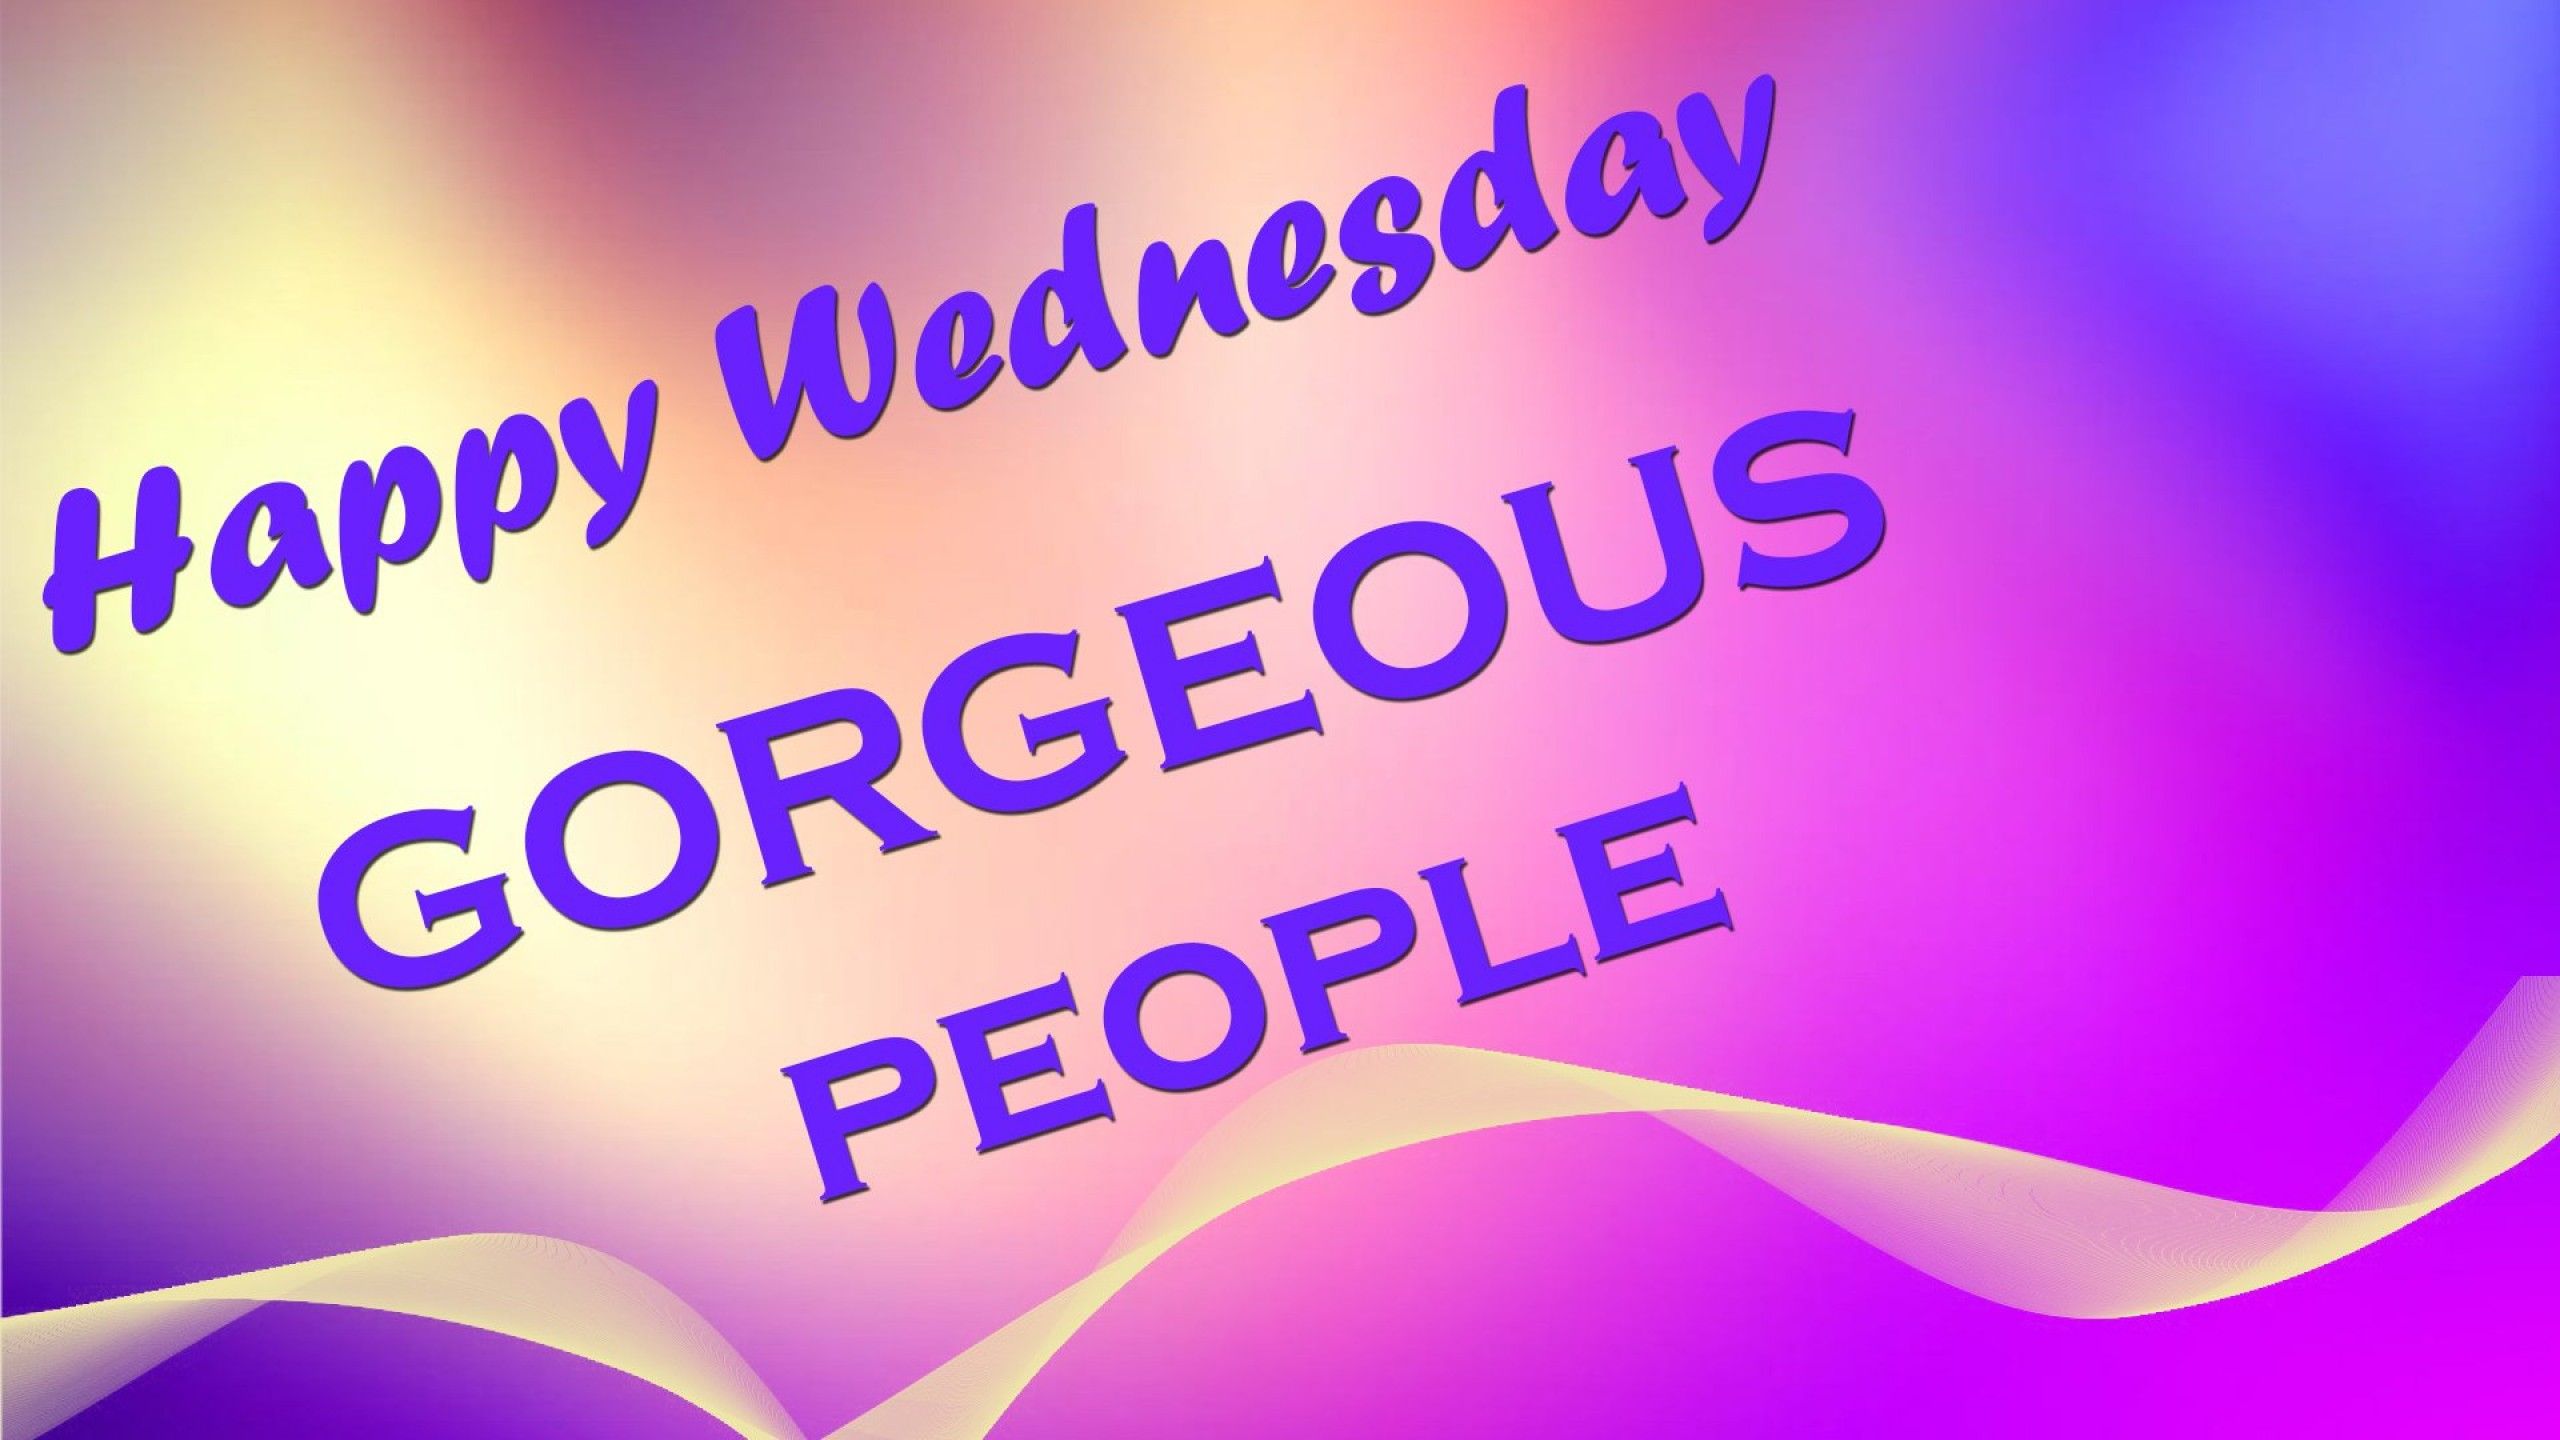 Happy Wednesday! HD Wallpaper available in different dimensions Youtube Cover Photo